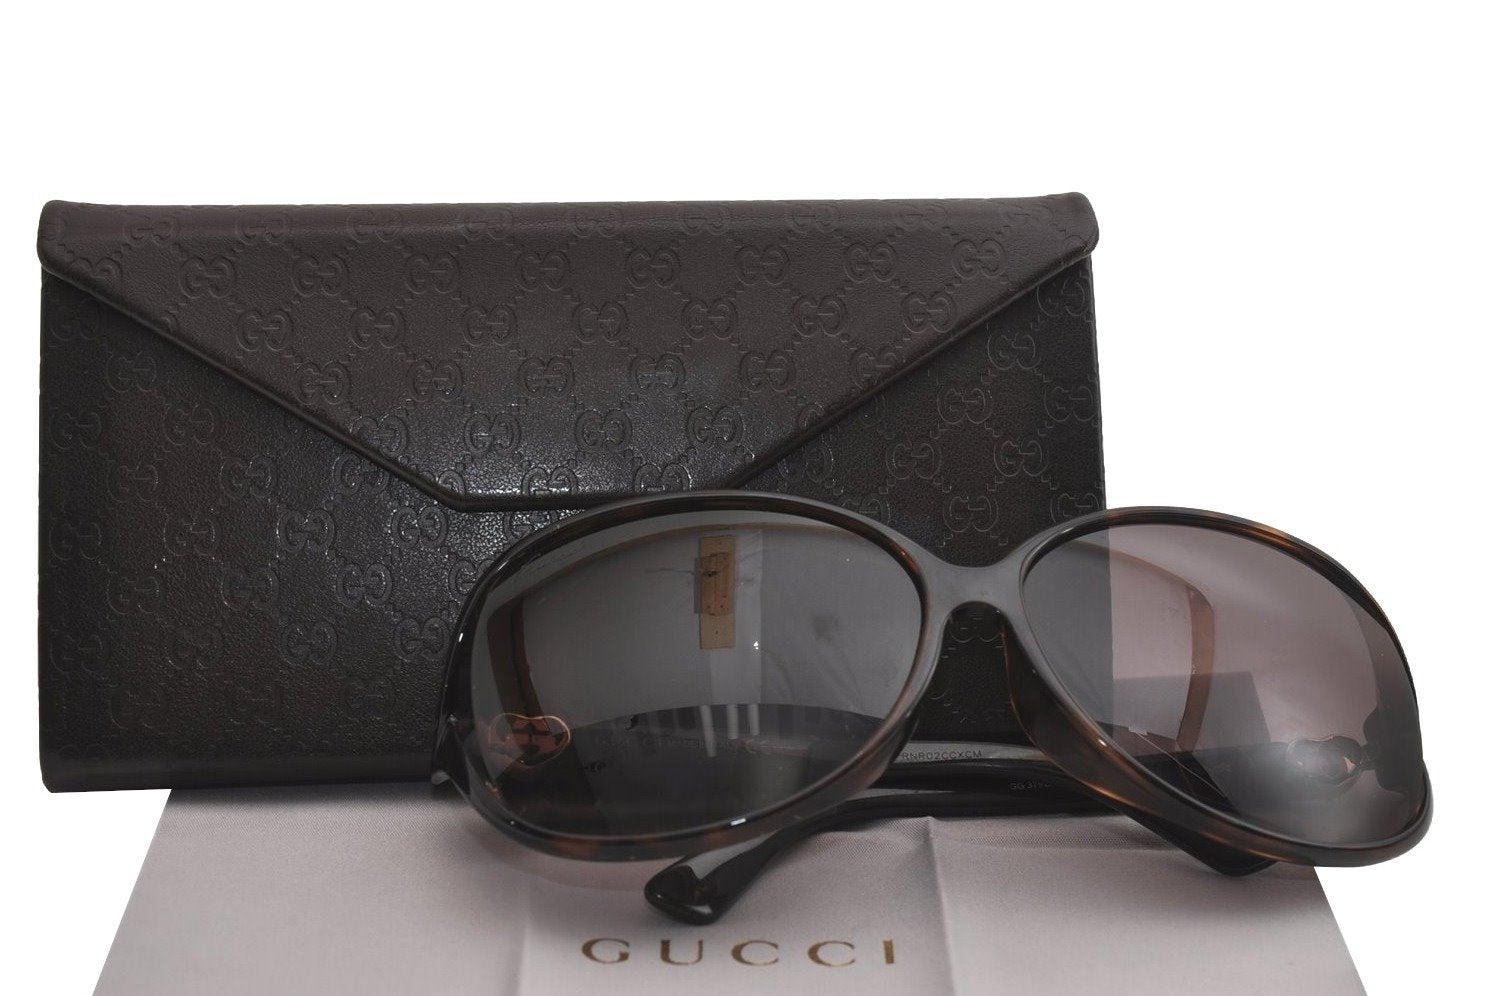 Authentic GUCCI Lovely Heart Vintage Sunglasses GG 3792/F/S Plastic Brown 6959J